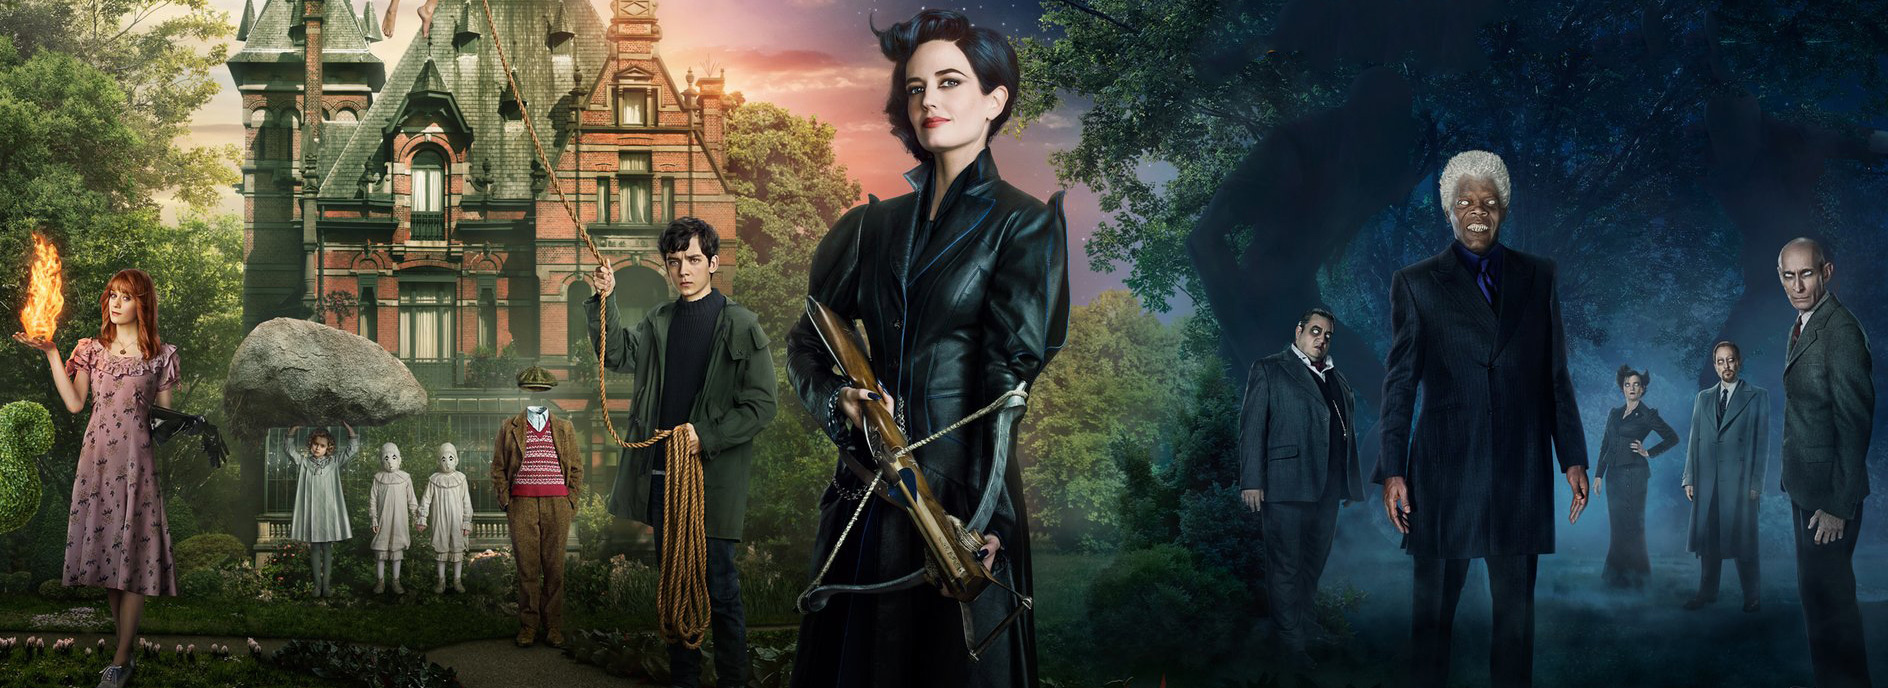 Movie poster Miss Peregrine's Home for Peculiar Children